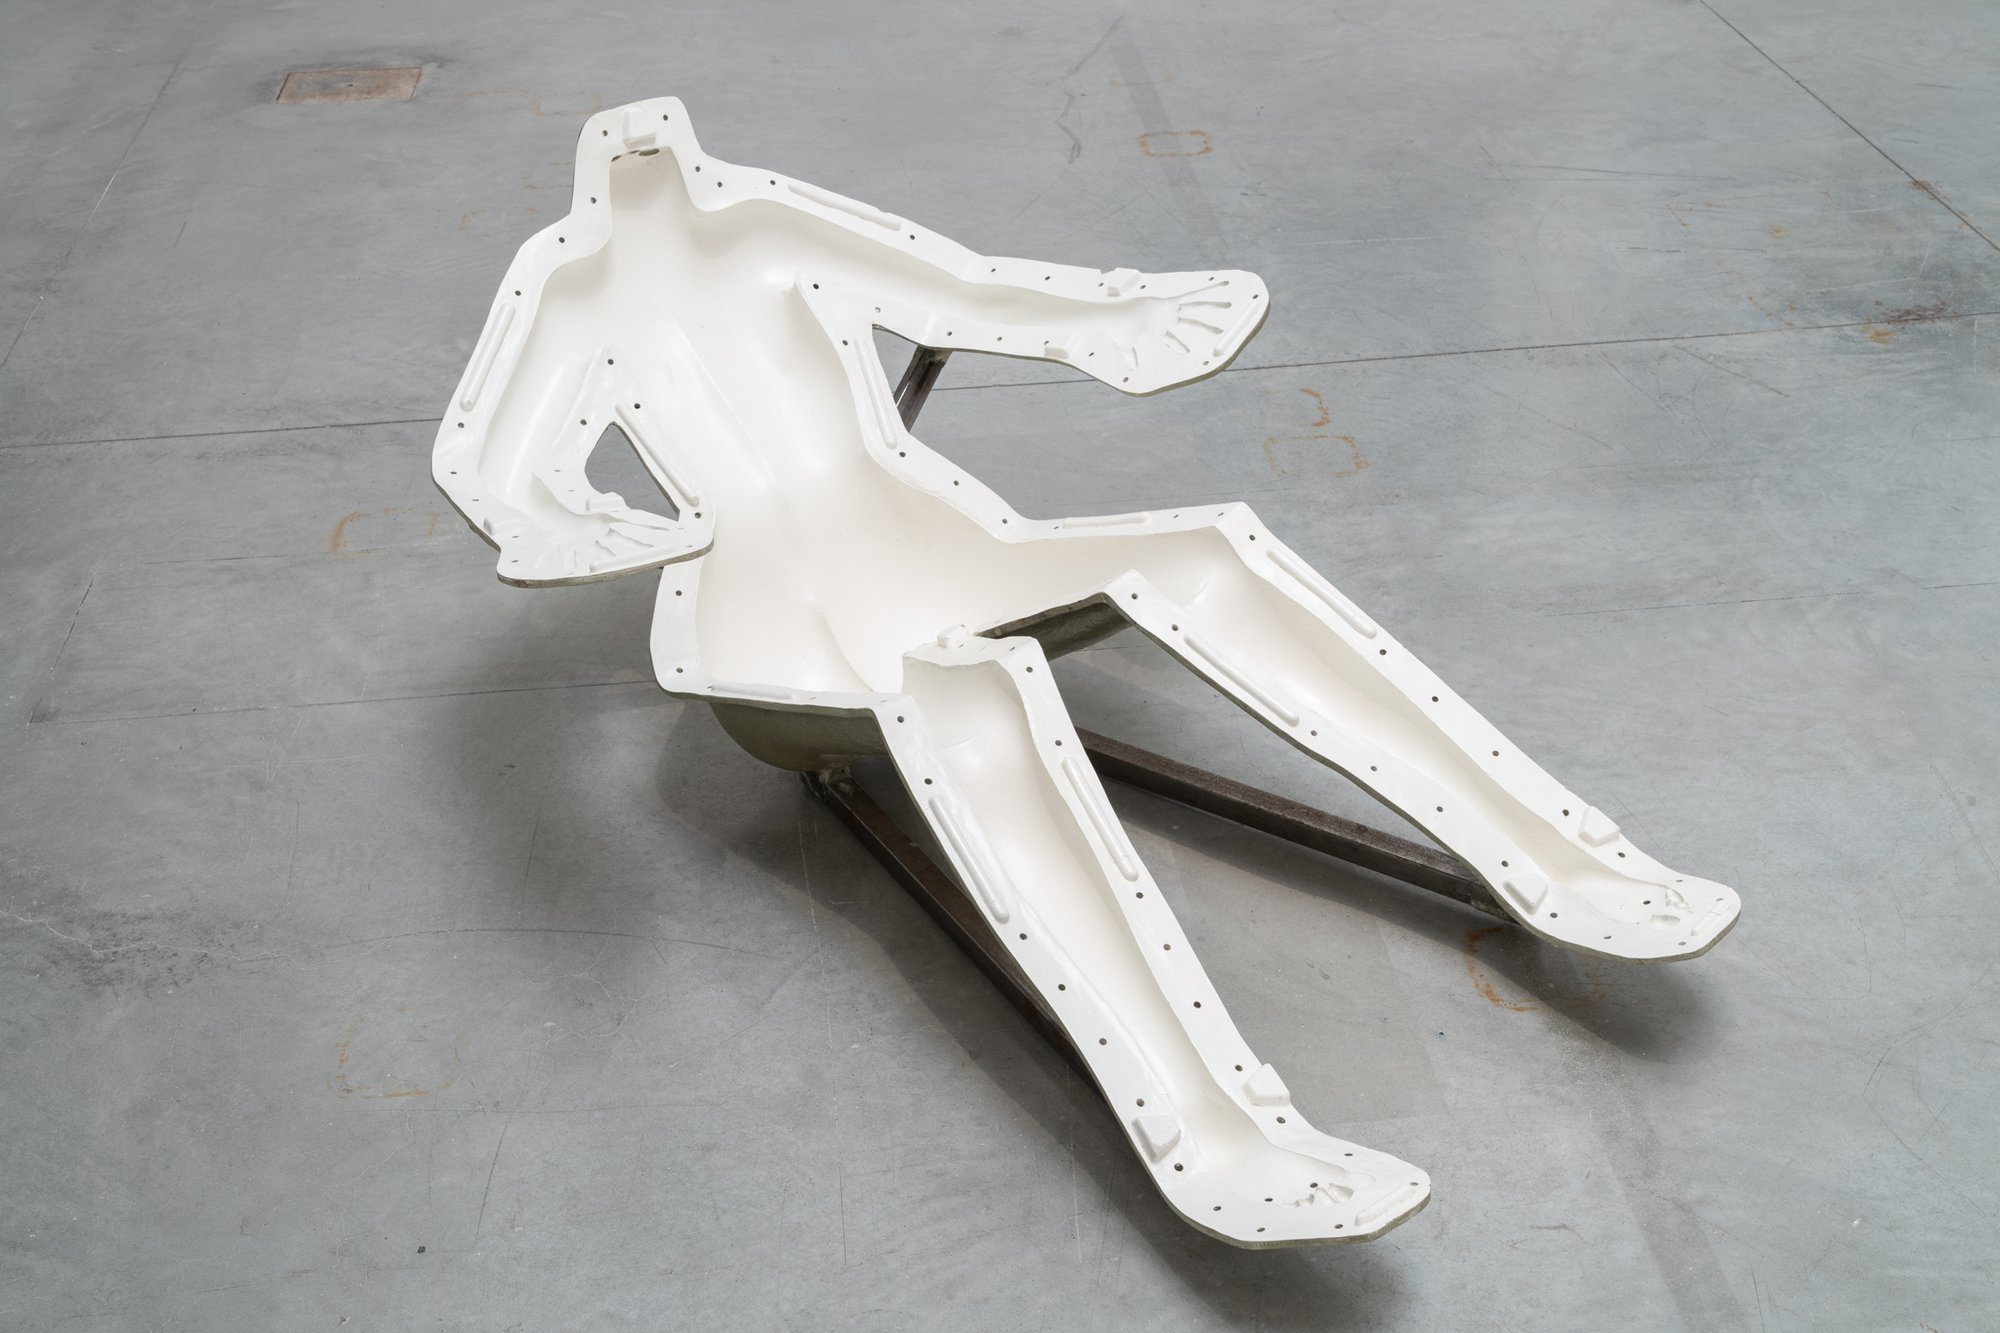 Sidsel Meineche Hansen, Daddy Mould, industrial cast in two parts made from fibreglass, resin and vaseline, 149 × 37 × 92 cm and 149 × 48 × 89 cm, 2018. Installation view, The Milk of Dreams, 59th International Art Exhibition – La Biennale di Venezia, Venice, 2022